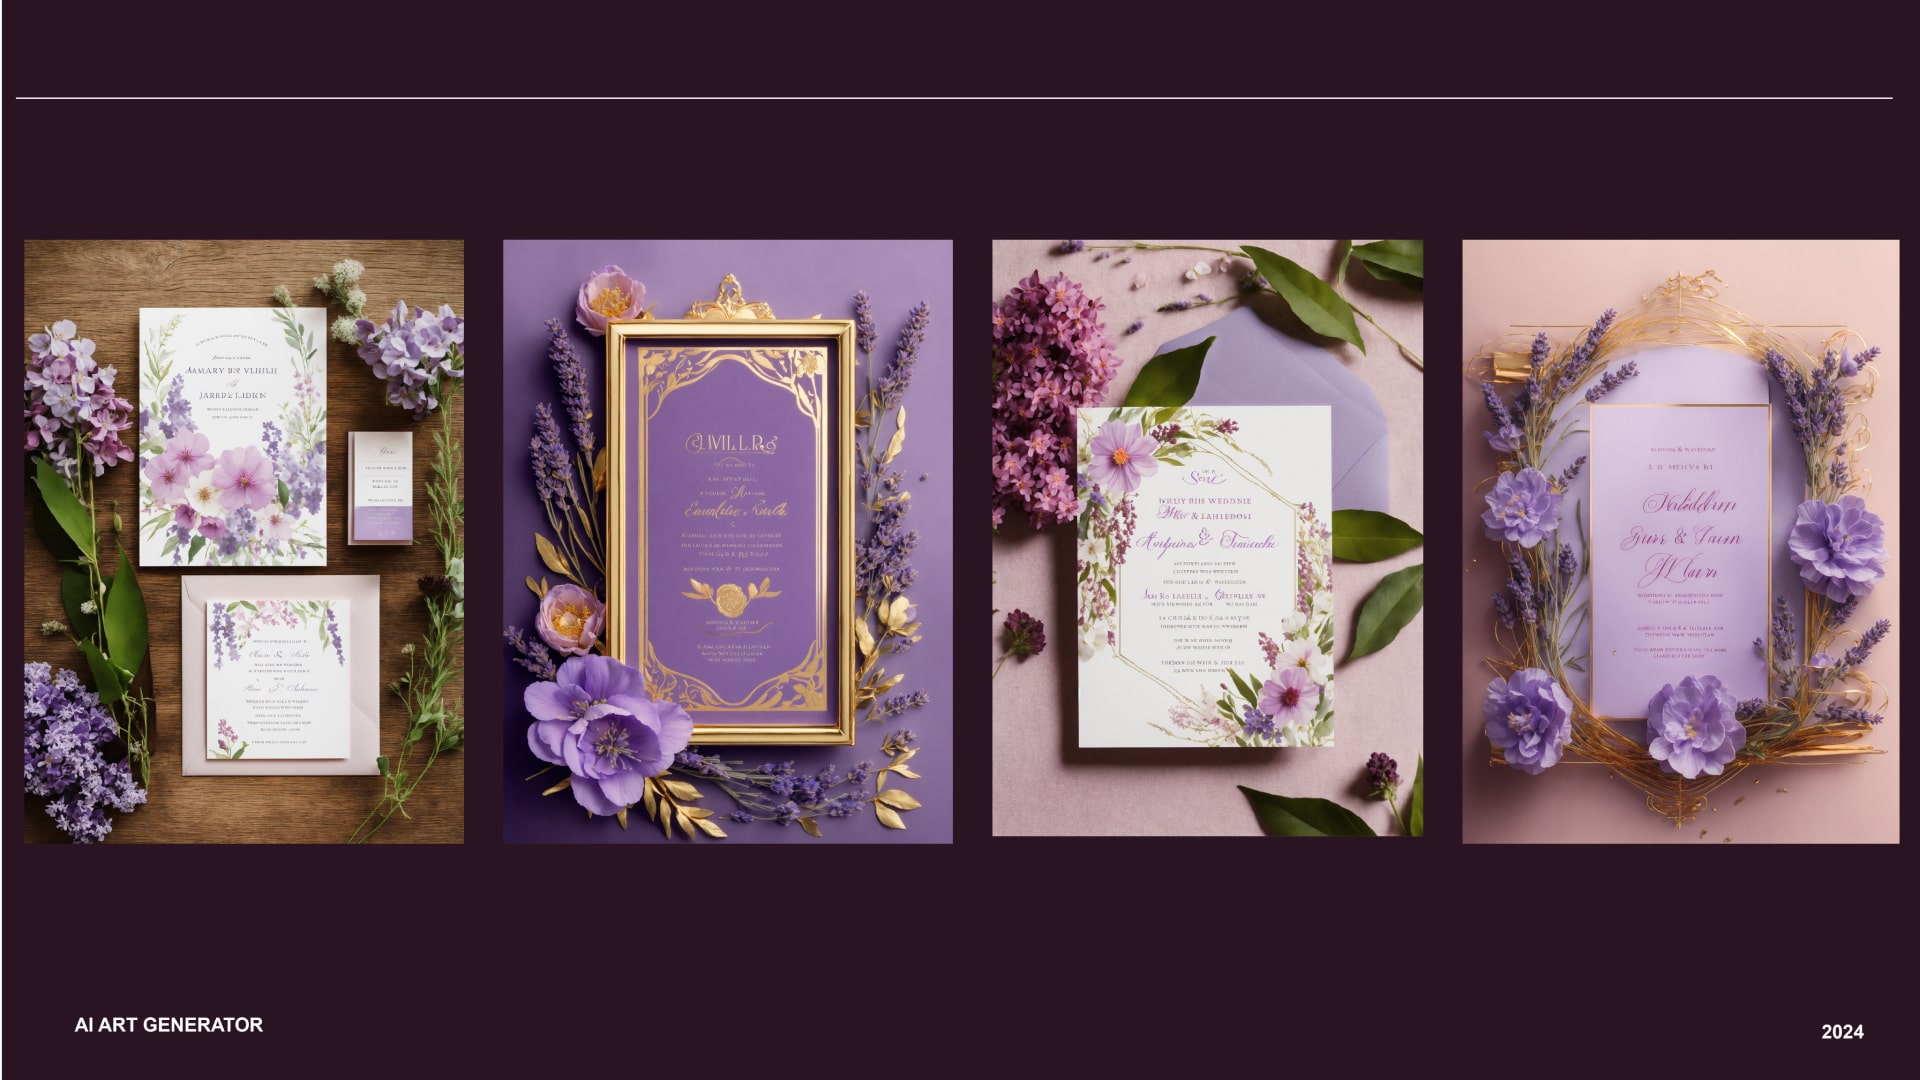 close-up of wedding stationery with incorporated personal details